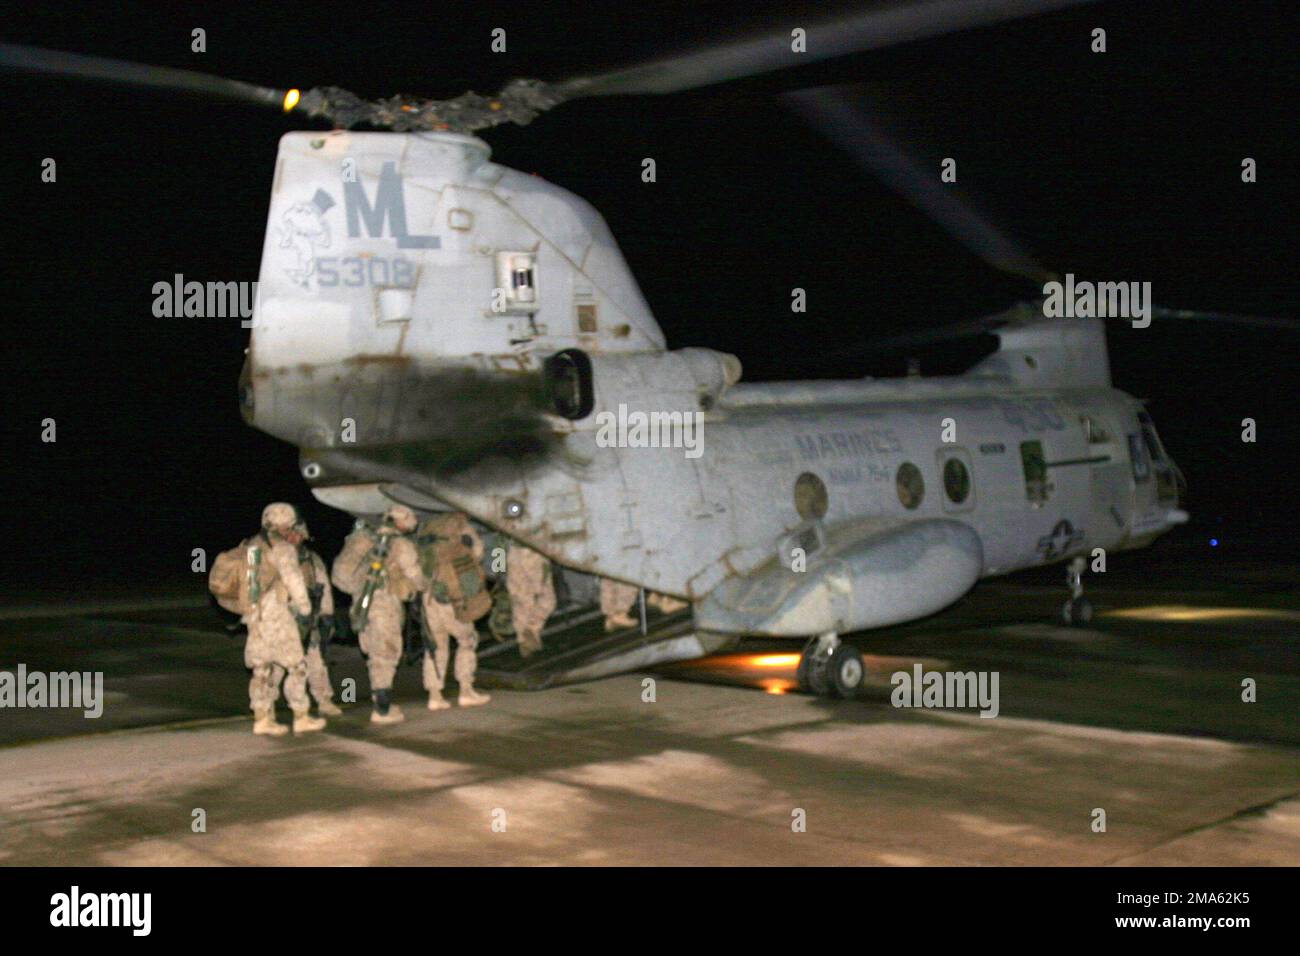 US Marine Corps (USMC) Infantry Marines from 3rd Battalion (BN), 25th Marine Regiment (MAR REGT), Regimental Combat Team-2 (RCT-2), board a USMC CH-46E Sea Knight helicopter, Marine Medium Helicopter Squadron 764 (HMM-764), 4th Marine Aircraft Wing (MAW), Edwards Air Force Base (AFB), California (CA), on Al Asad Air Base (AB), Iraq, for Operation RIVER SWEEP in support of Operation IRAQI FREEDOM. Base: Al Asad Air Base State: Al Anbar Country: Iraq (IRQ) Stock Photo